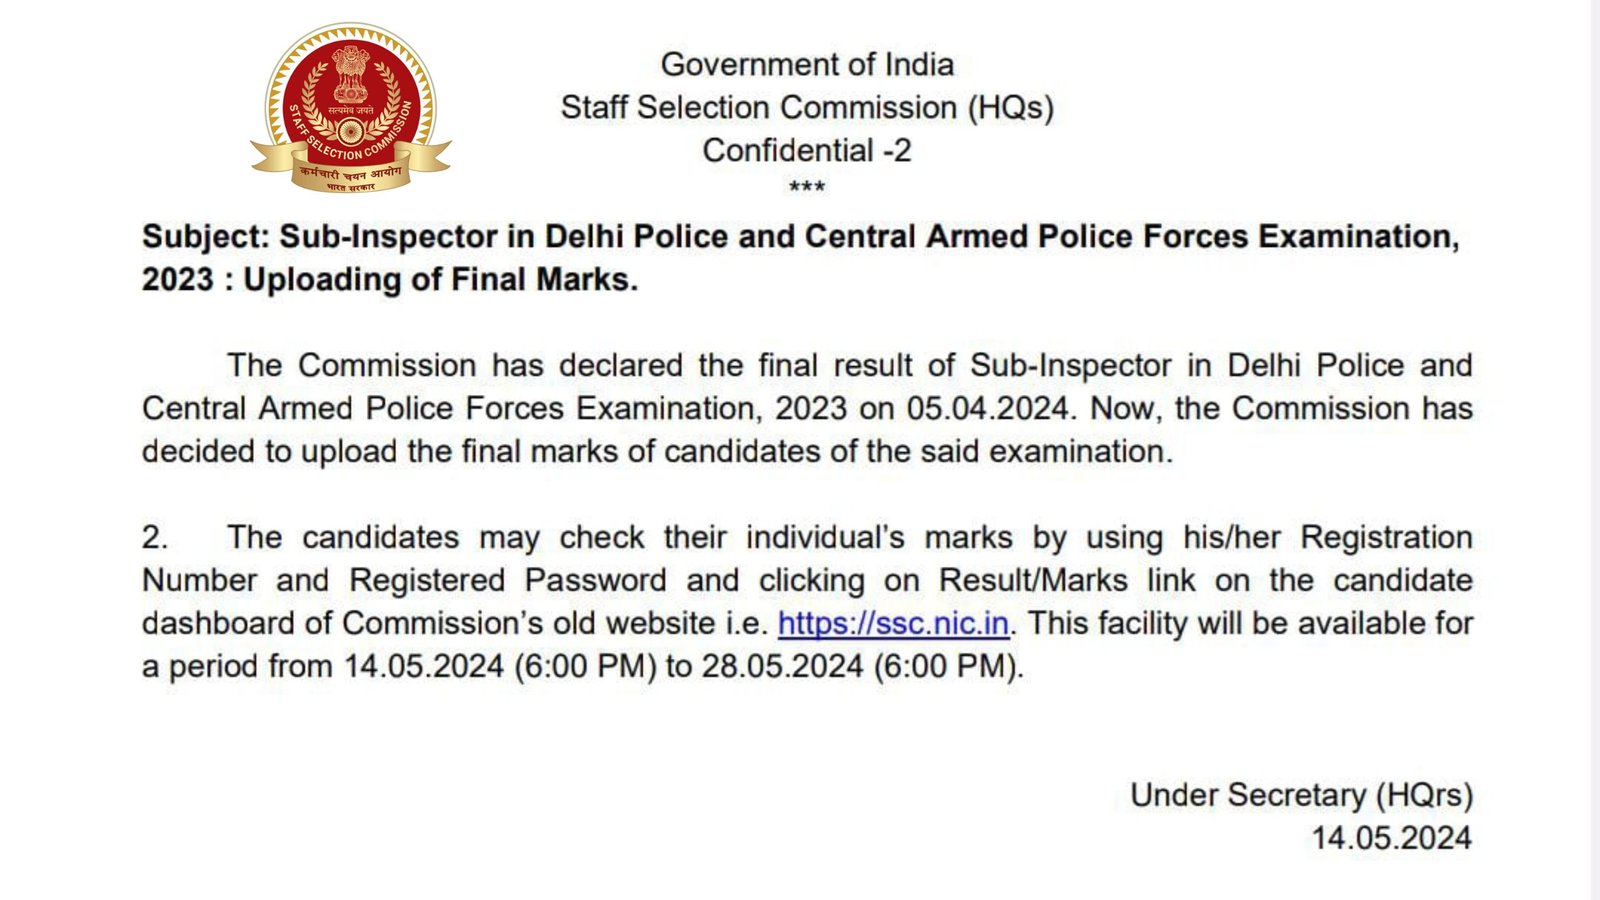 Sub-Inspector in Delhi Police and Central Armed Police Forces Examination 2023 Final Marks Released